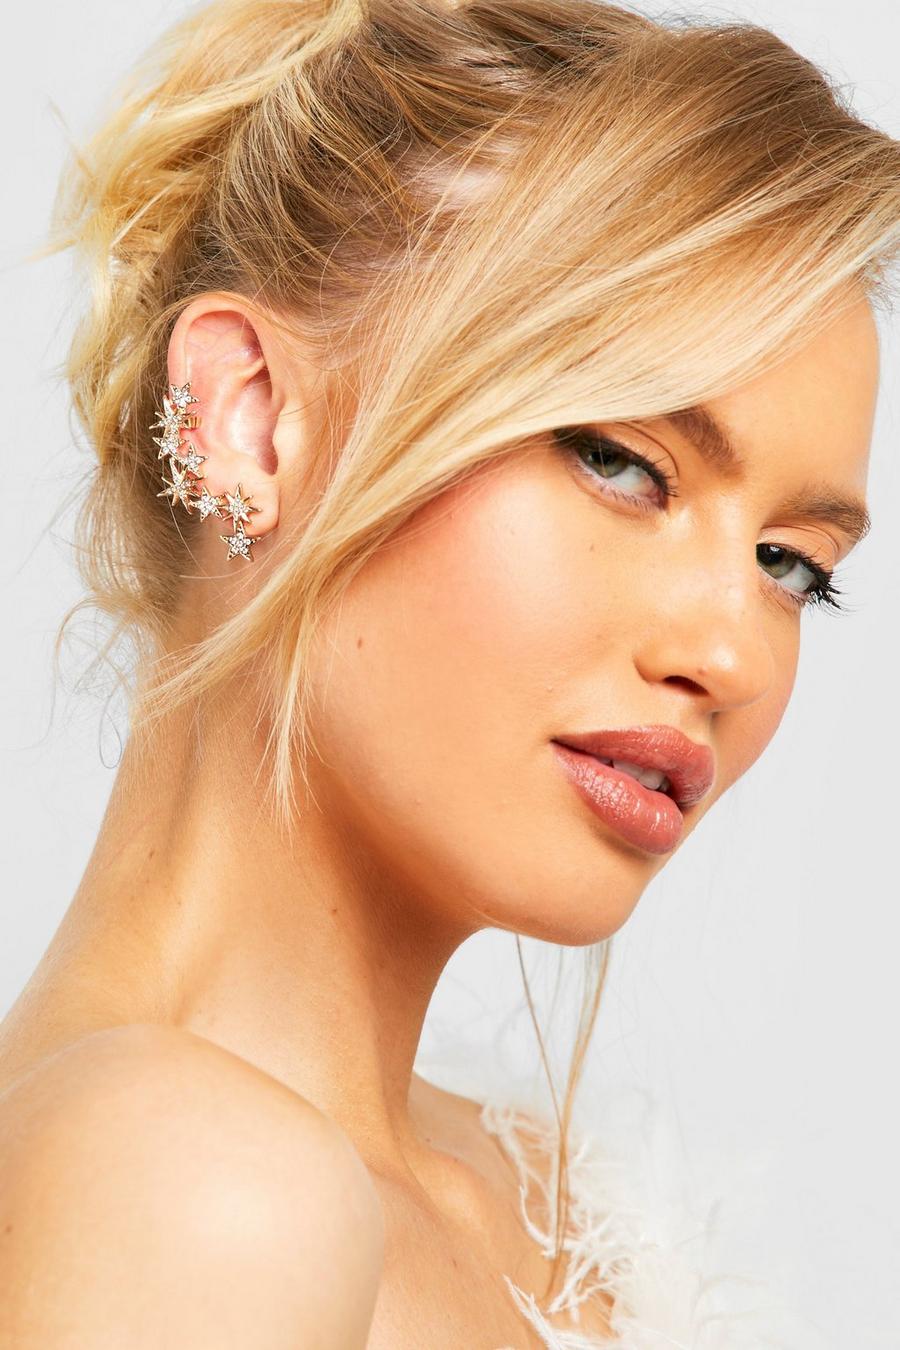 Gold metálicos Statement North Star Cluster Ear Cuff Earring